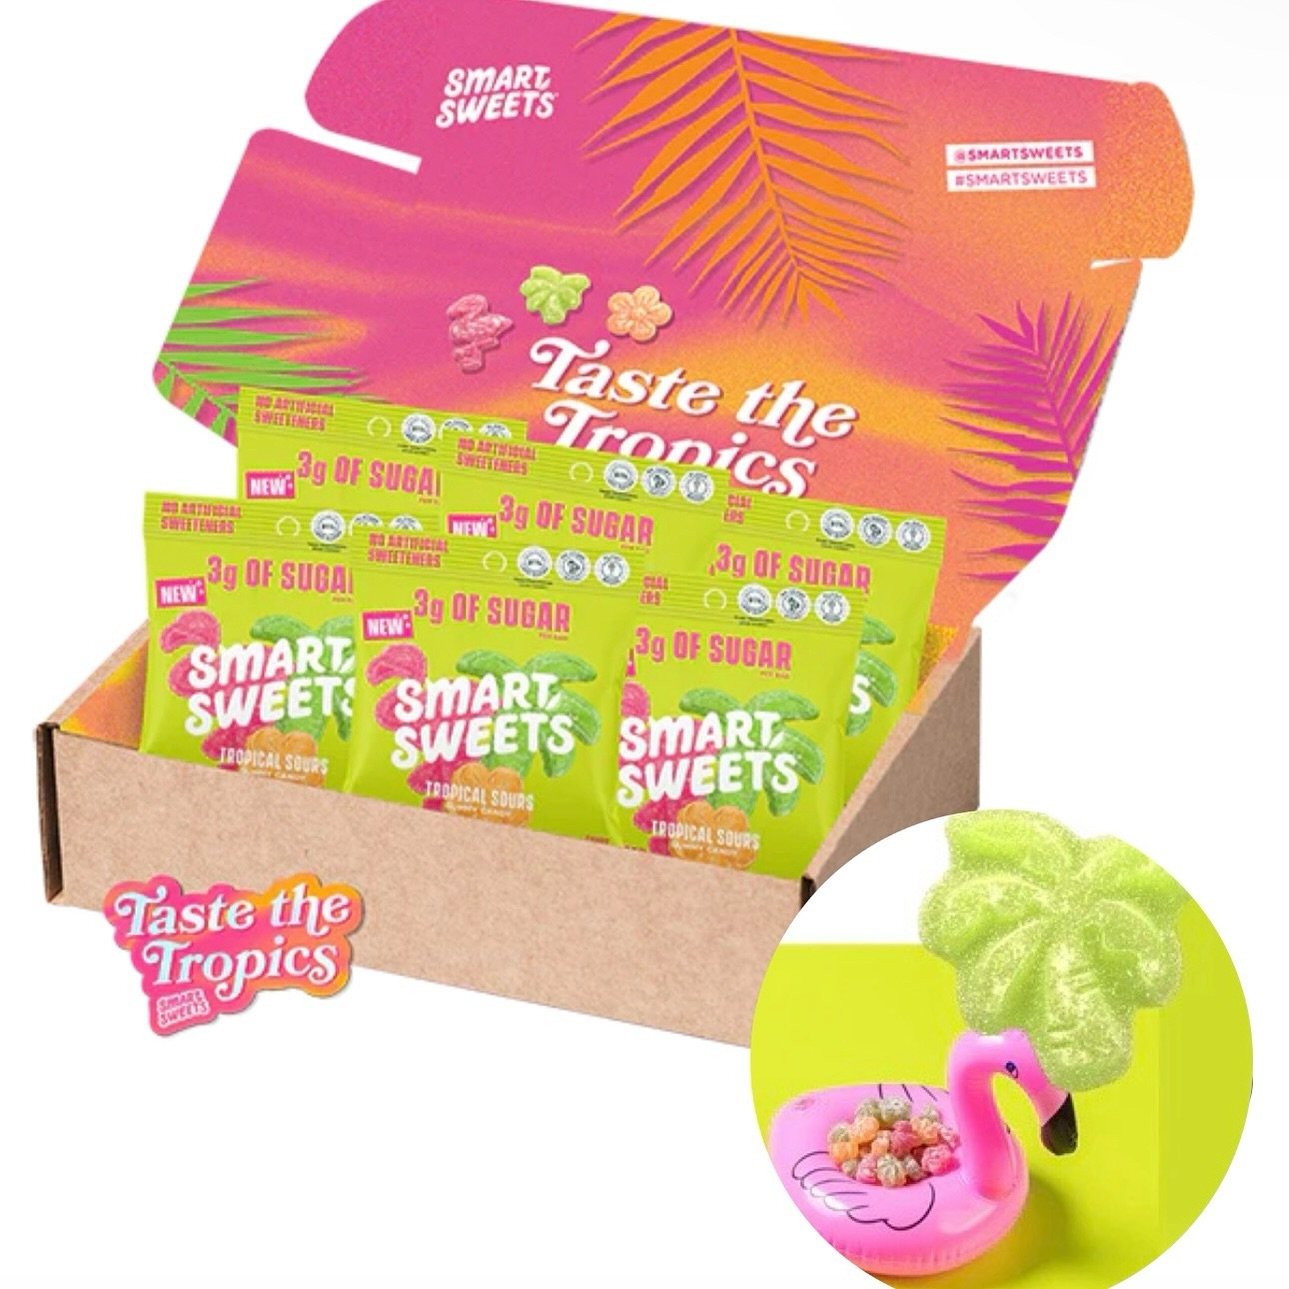 🍭GIVEAWAY ALERT 🍭 We&rsquo;ve partnered with @SmartSweets to gift one lucky winner a Tropical Sours Kit! Enjoy the candy you know and love with up to 92% less sugar than traditional candy! This prize package includes:

🦩6 Bags of Tropical Sours
🦩